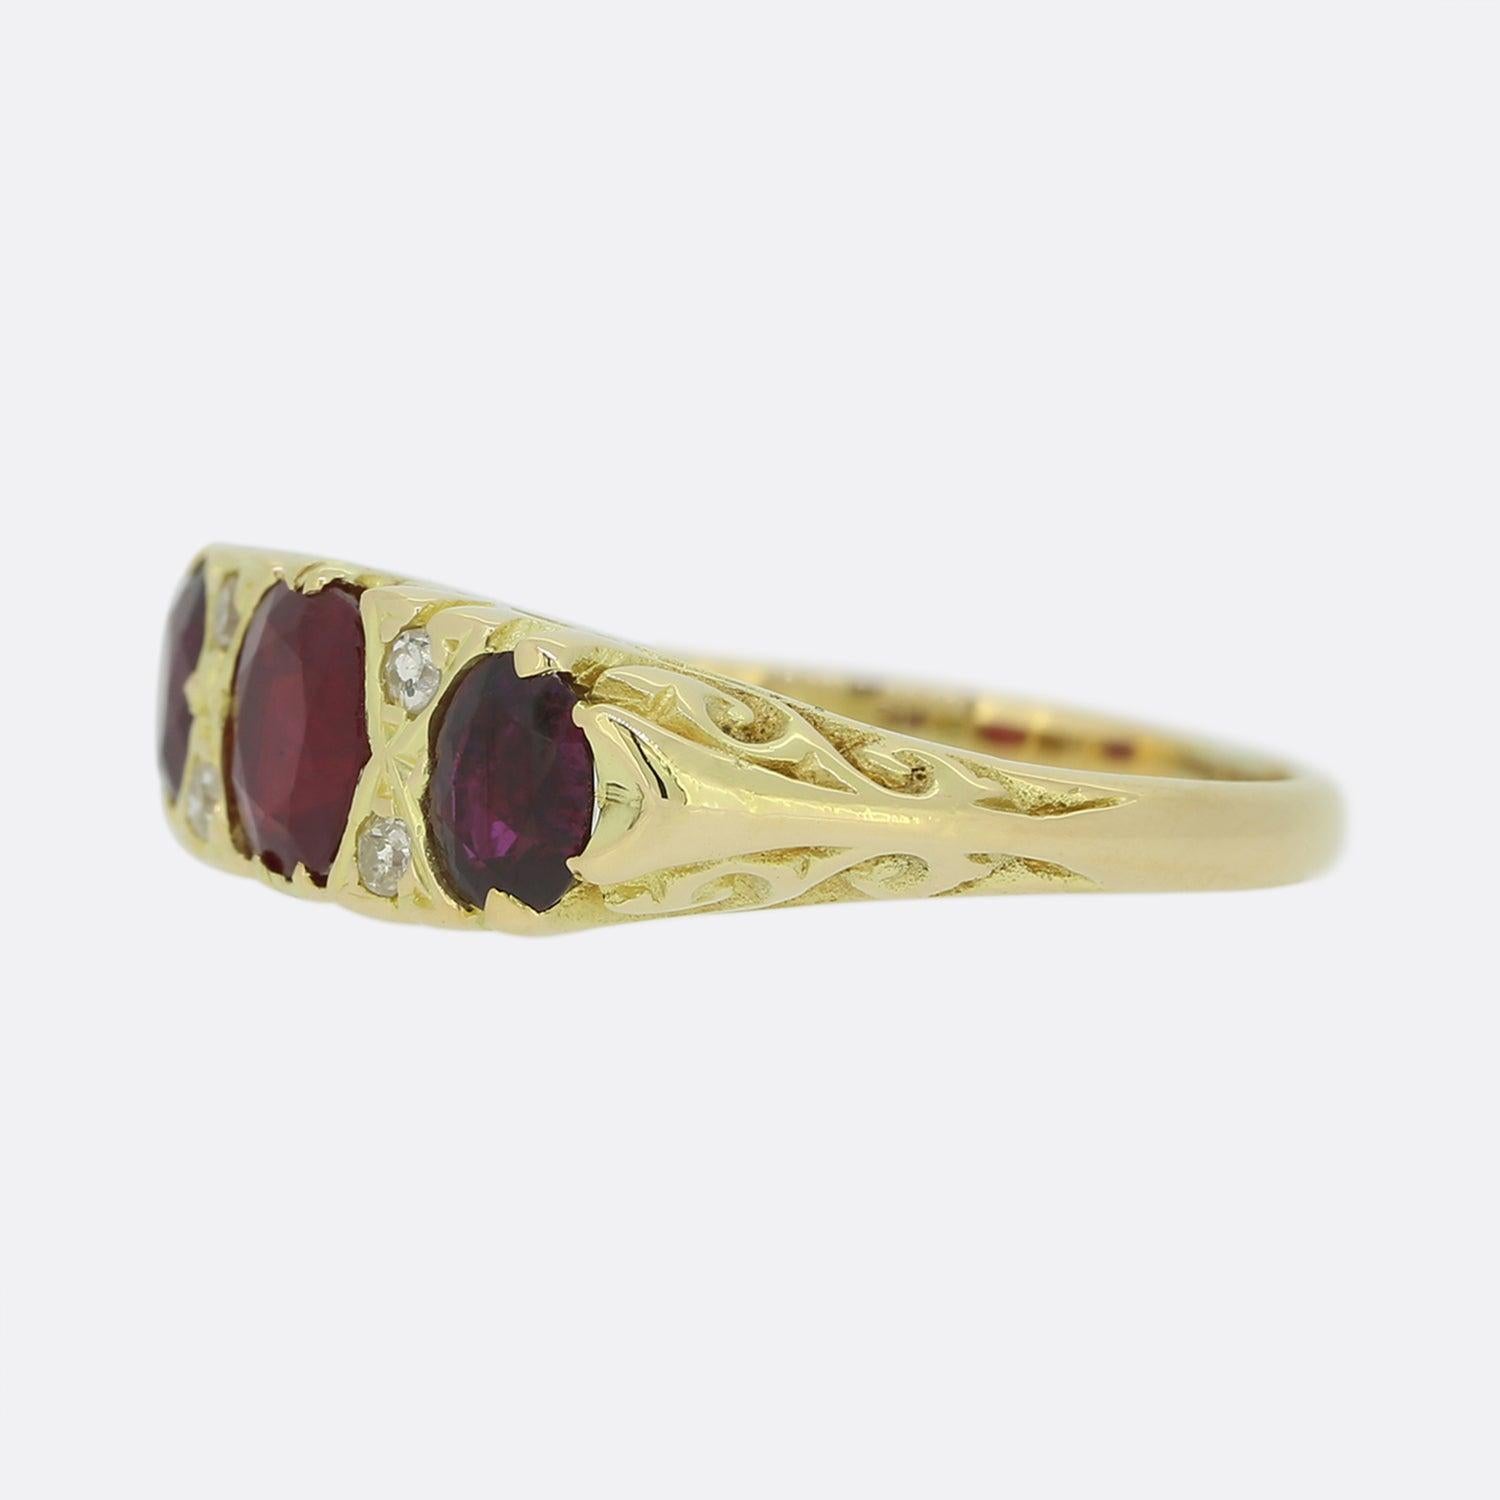 This is a vintage 18ct yellow gold ruby and diamond ring. Each ruby features a highly desirable rich red hue and the centre stone is slightly large than the other two. Separating the rubies there are four 'eight' cut diamonds.

Condition: Used (Very